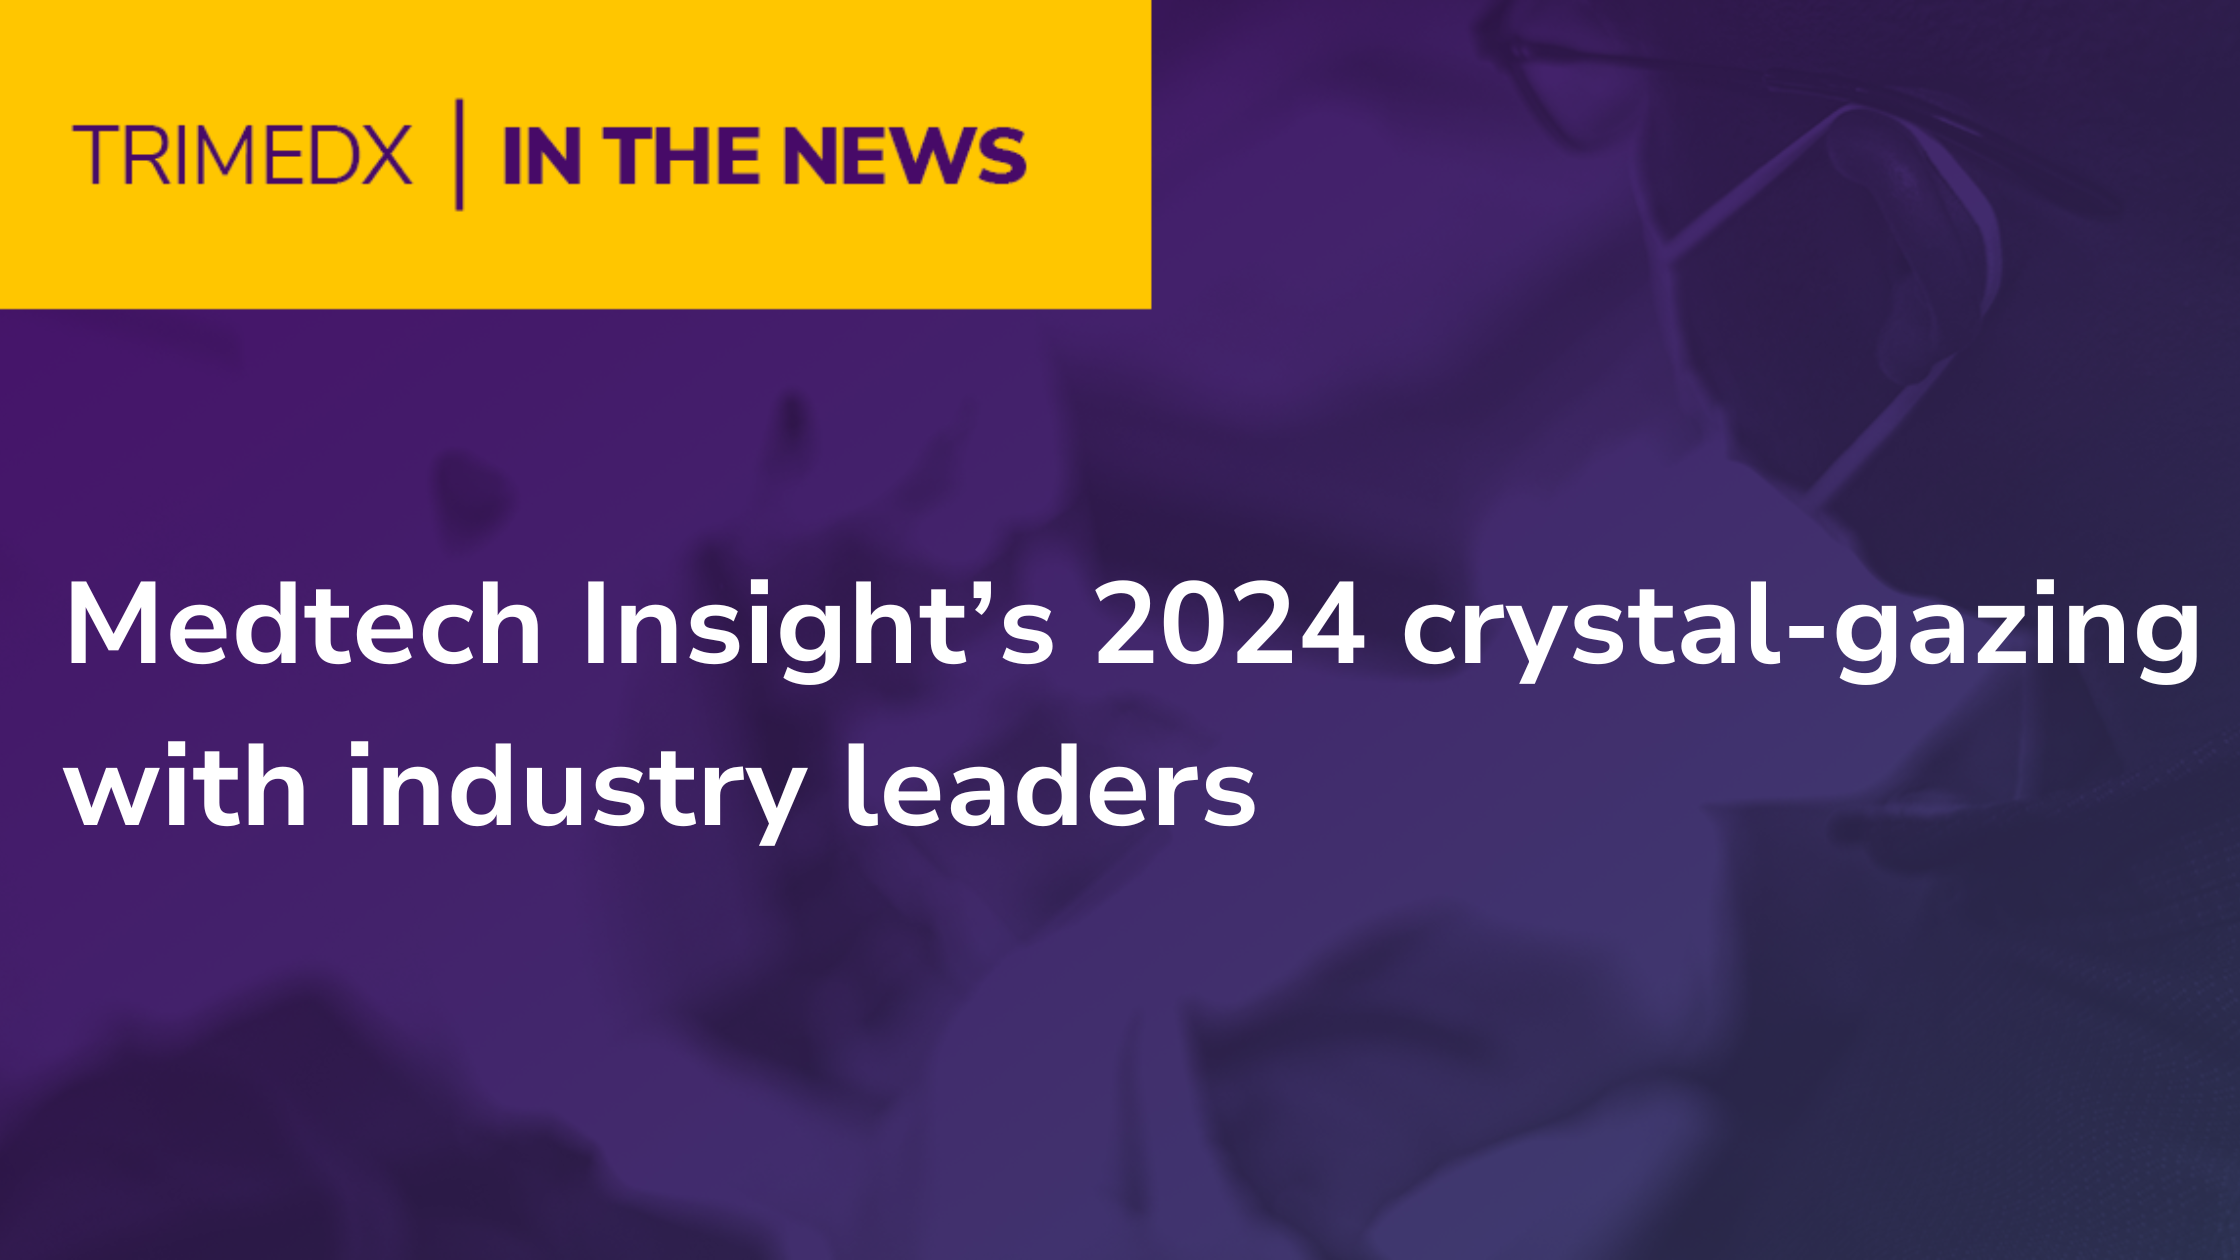 TRIMEDX In the News - Medtech Insight’s 2024 crystal-gazing with industry leaders 